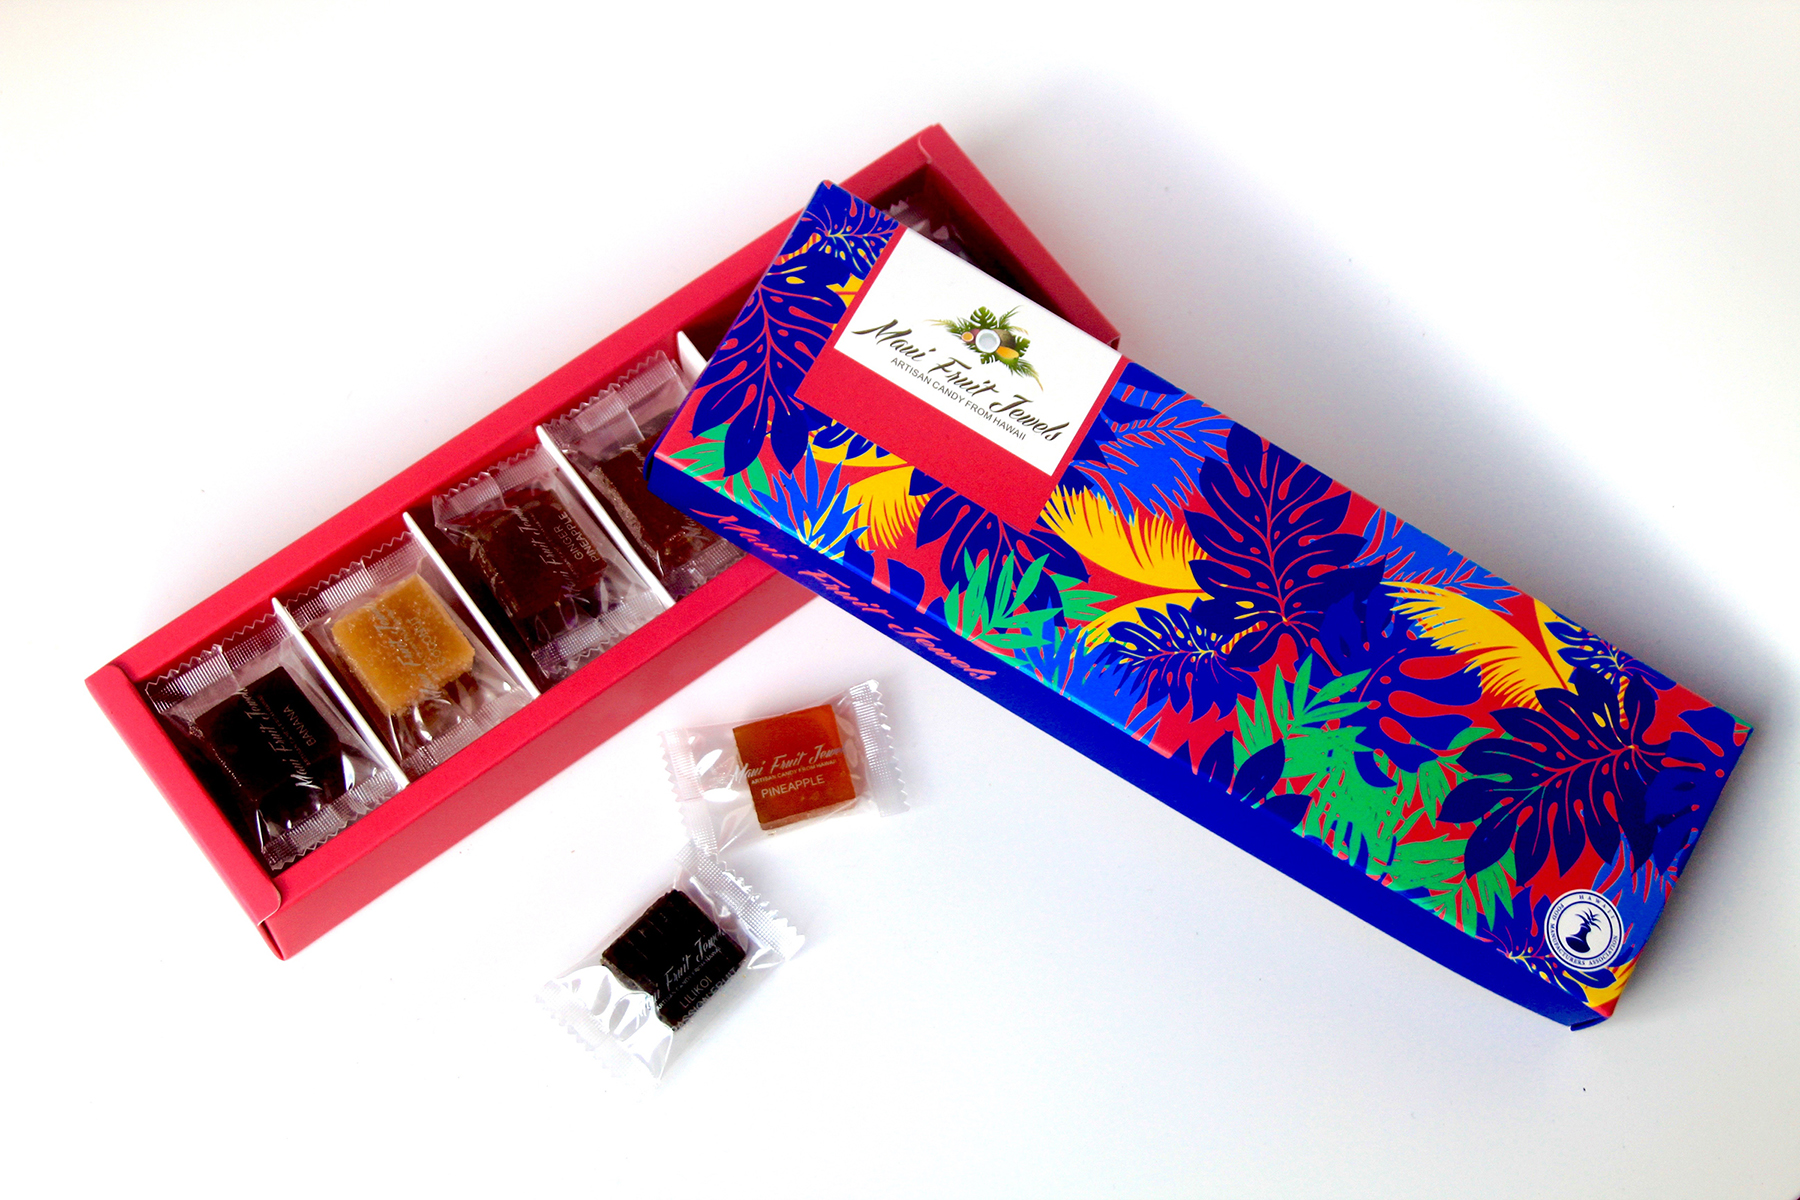 Maui Fruit Jewel’s Lahaina Collection is a gift-quality presentation box filled with a comprehensive assortment of fruit, spice, wine, and herb-flavored candies, including 18 flavors.